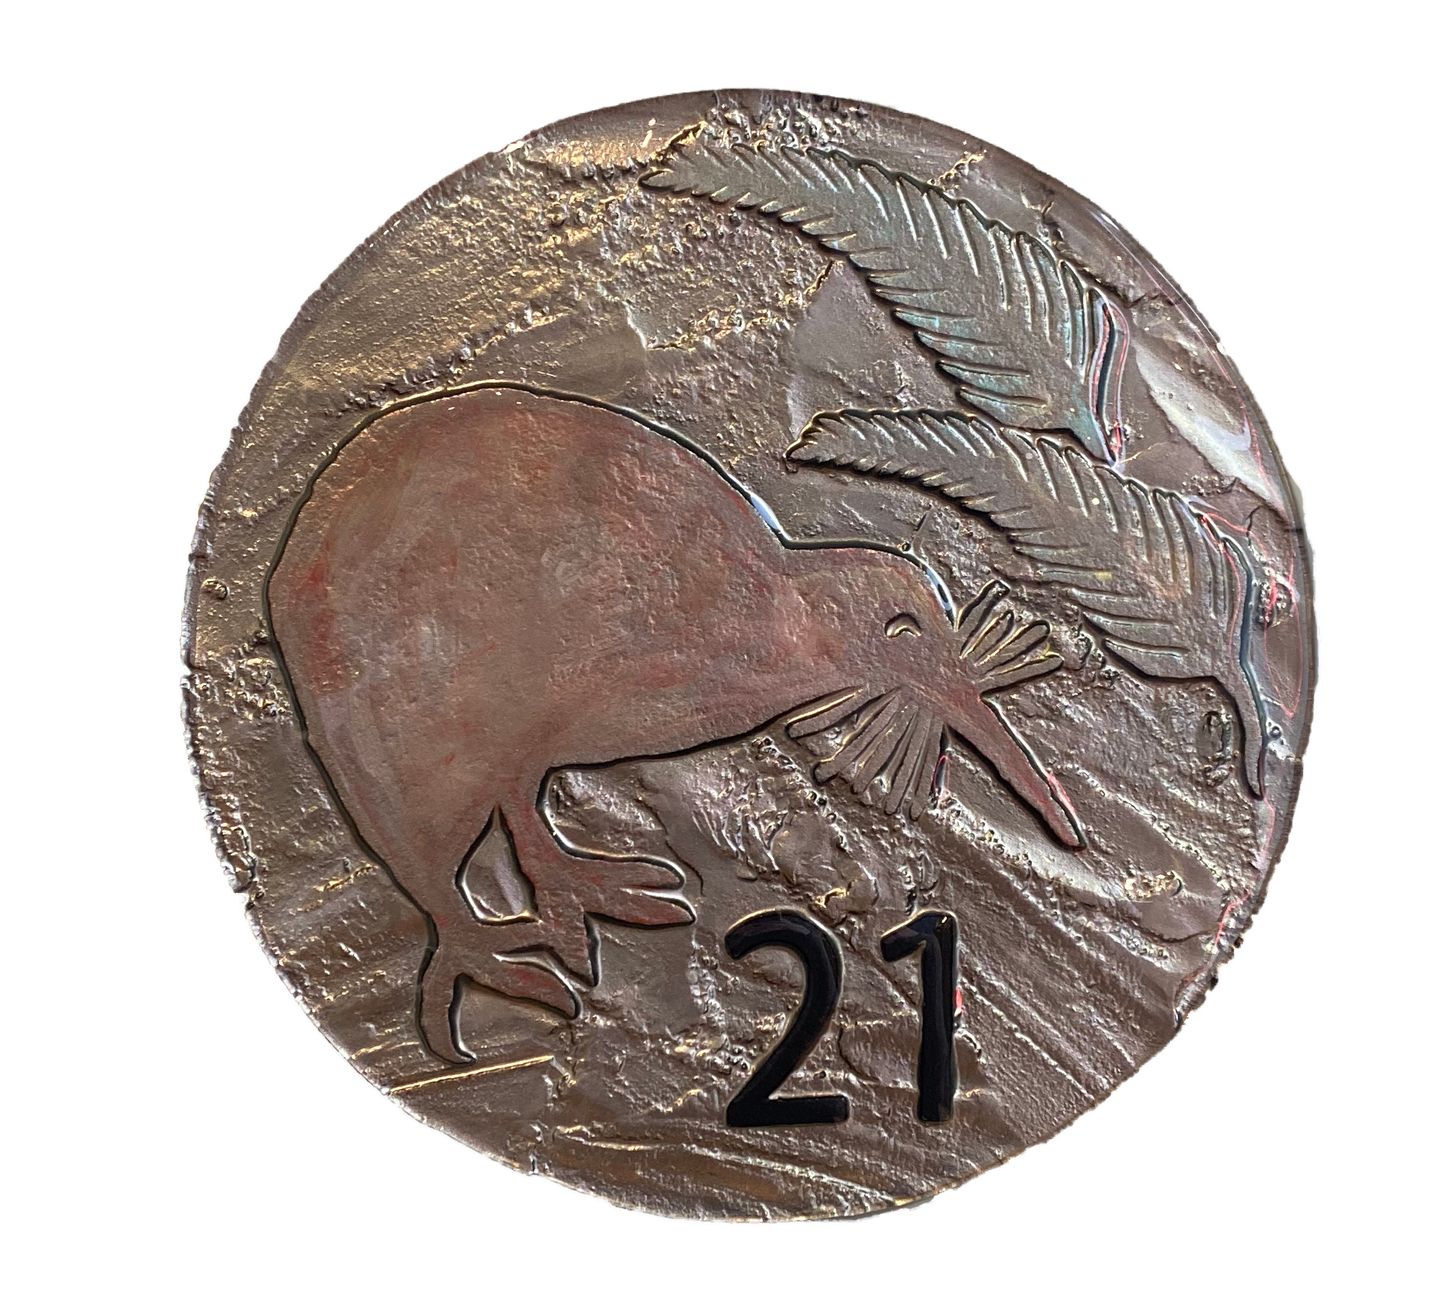 The 21st Cent Coin